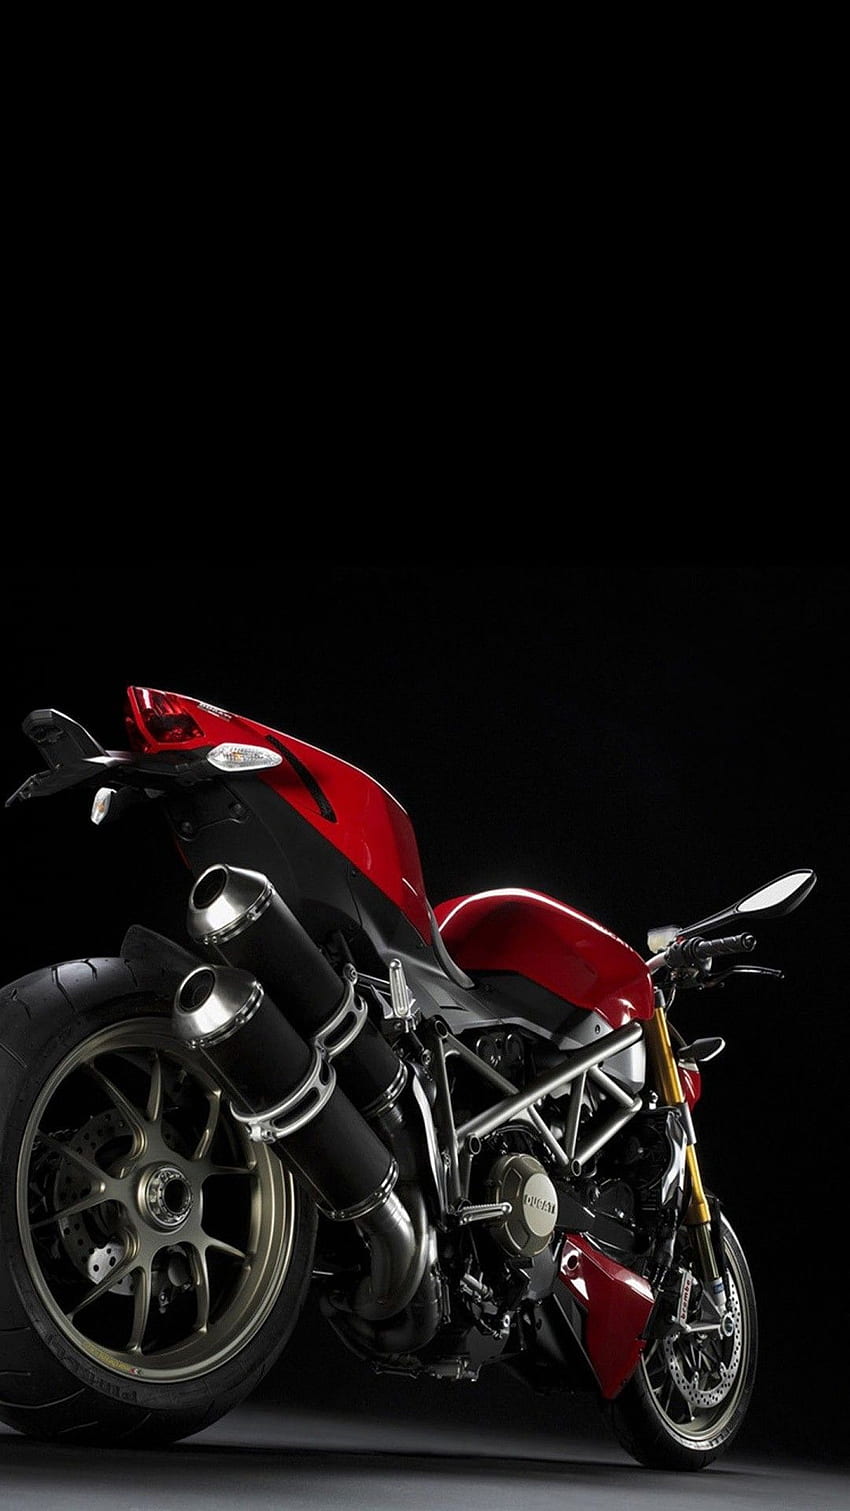 Motorcycle Background for Android Phones - background, Ducati HD phone wallpaper